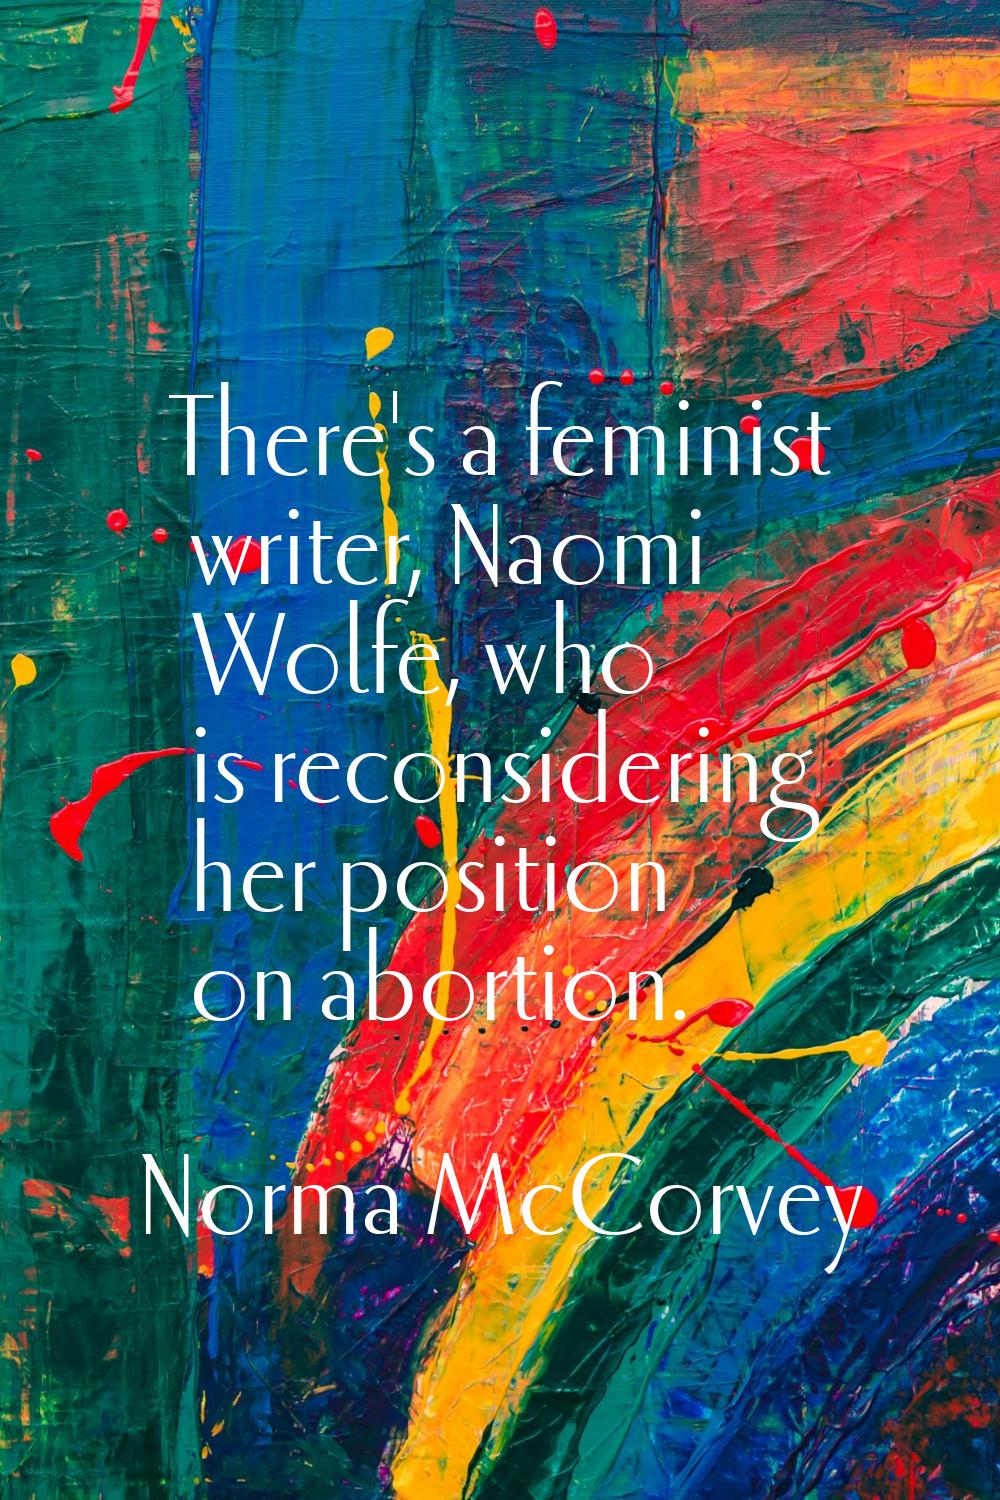 There's a feminist writer, Naomi Wolfe, who is reconsidering her position on abortion.